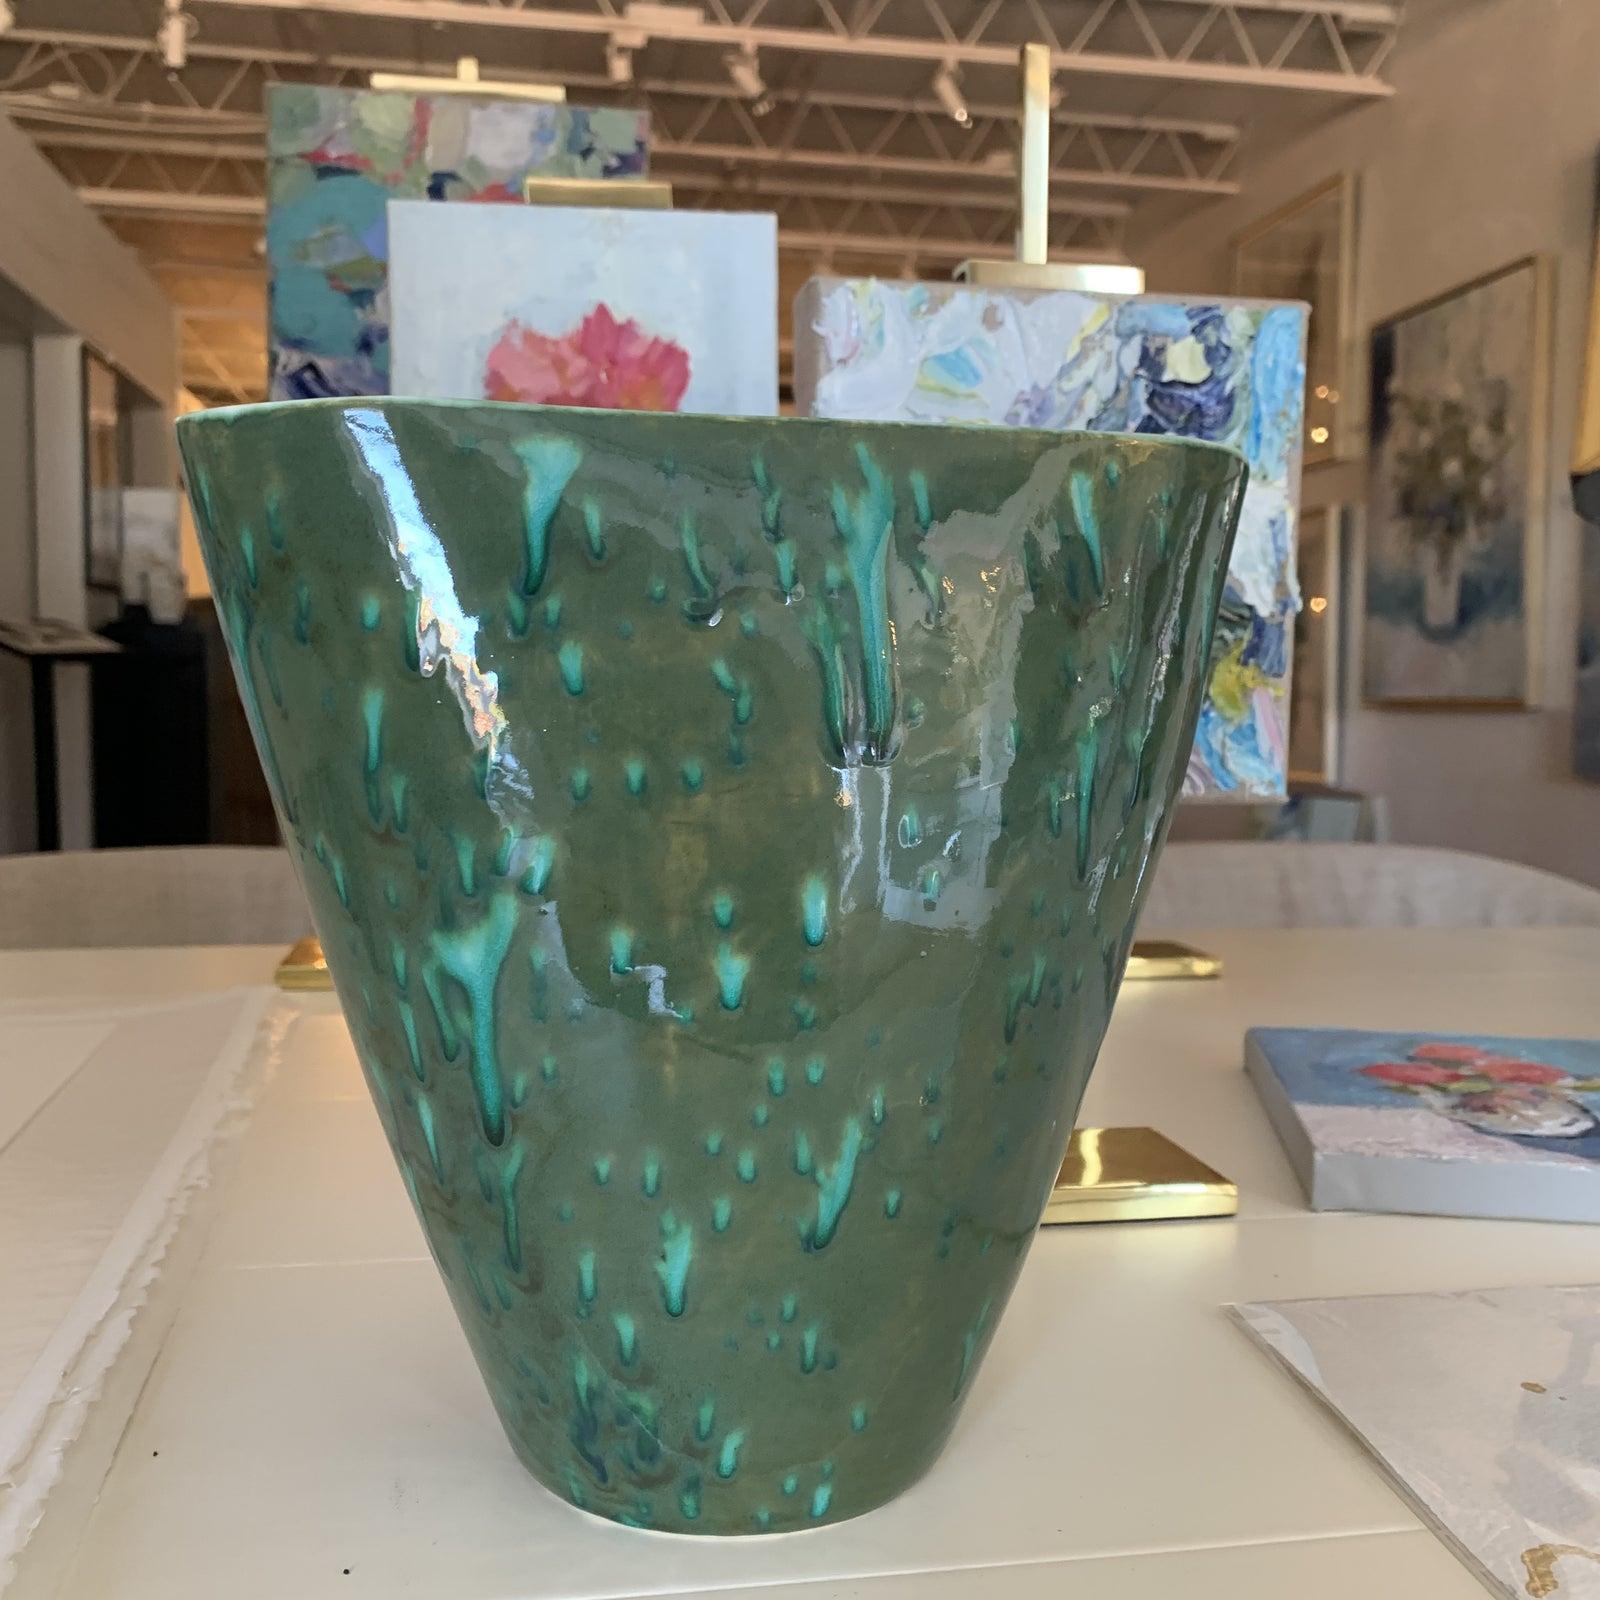 Handmade Green Pottery piece by artist, Stephanie Wheeler
Glazed Finish with Green Tones
Signed on the Base